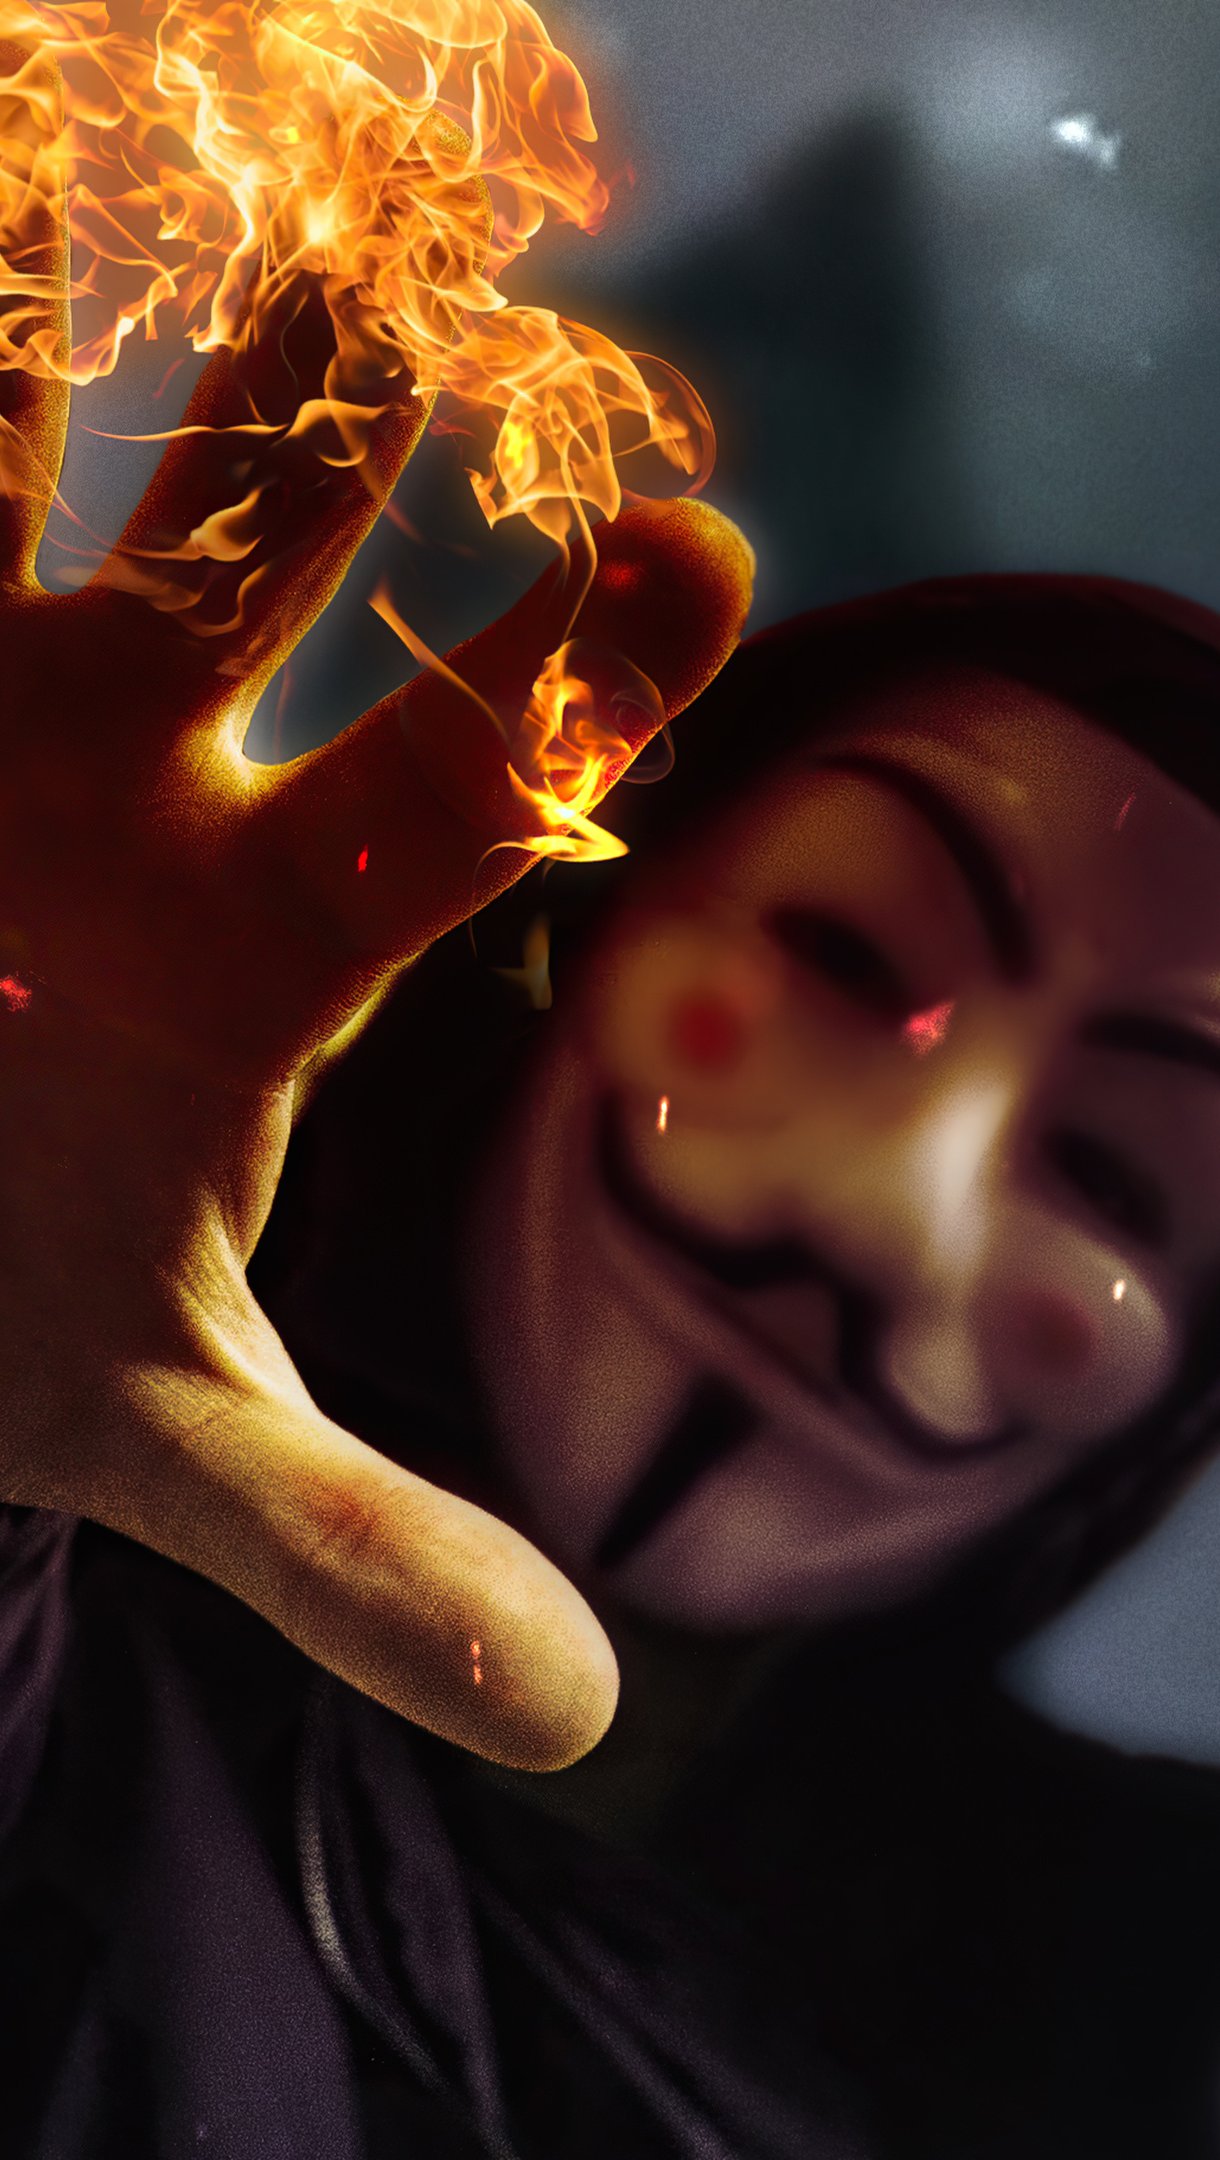 Anonymous Mask Wallpapers